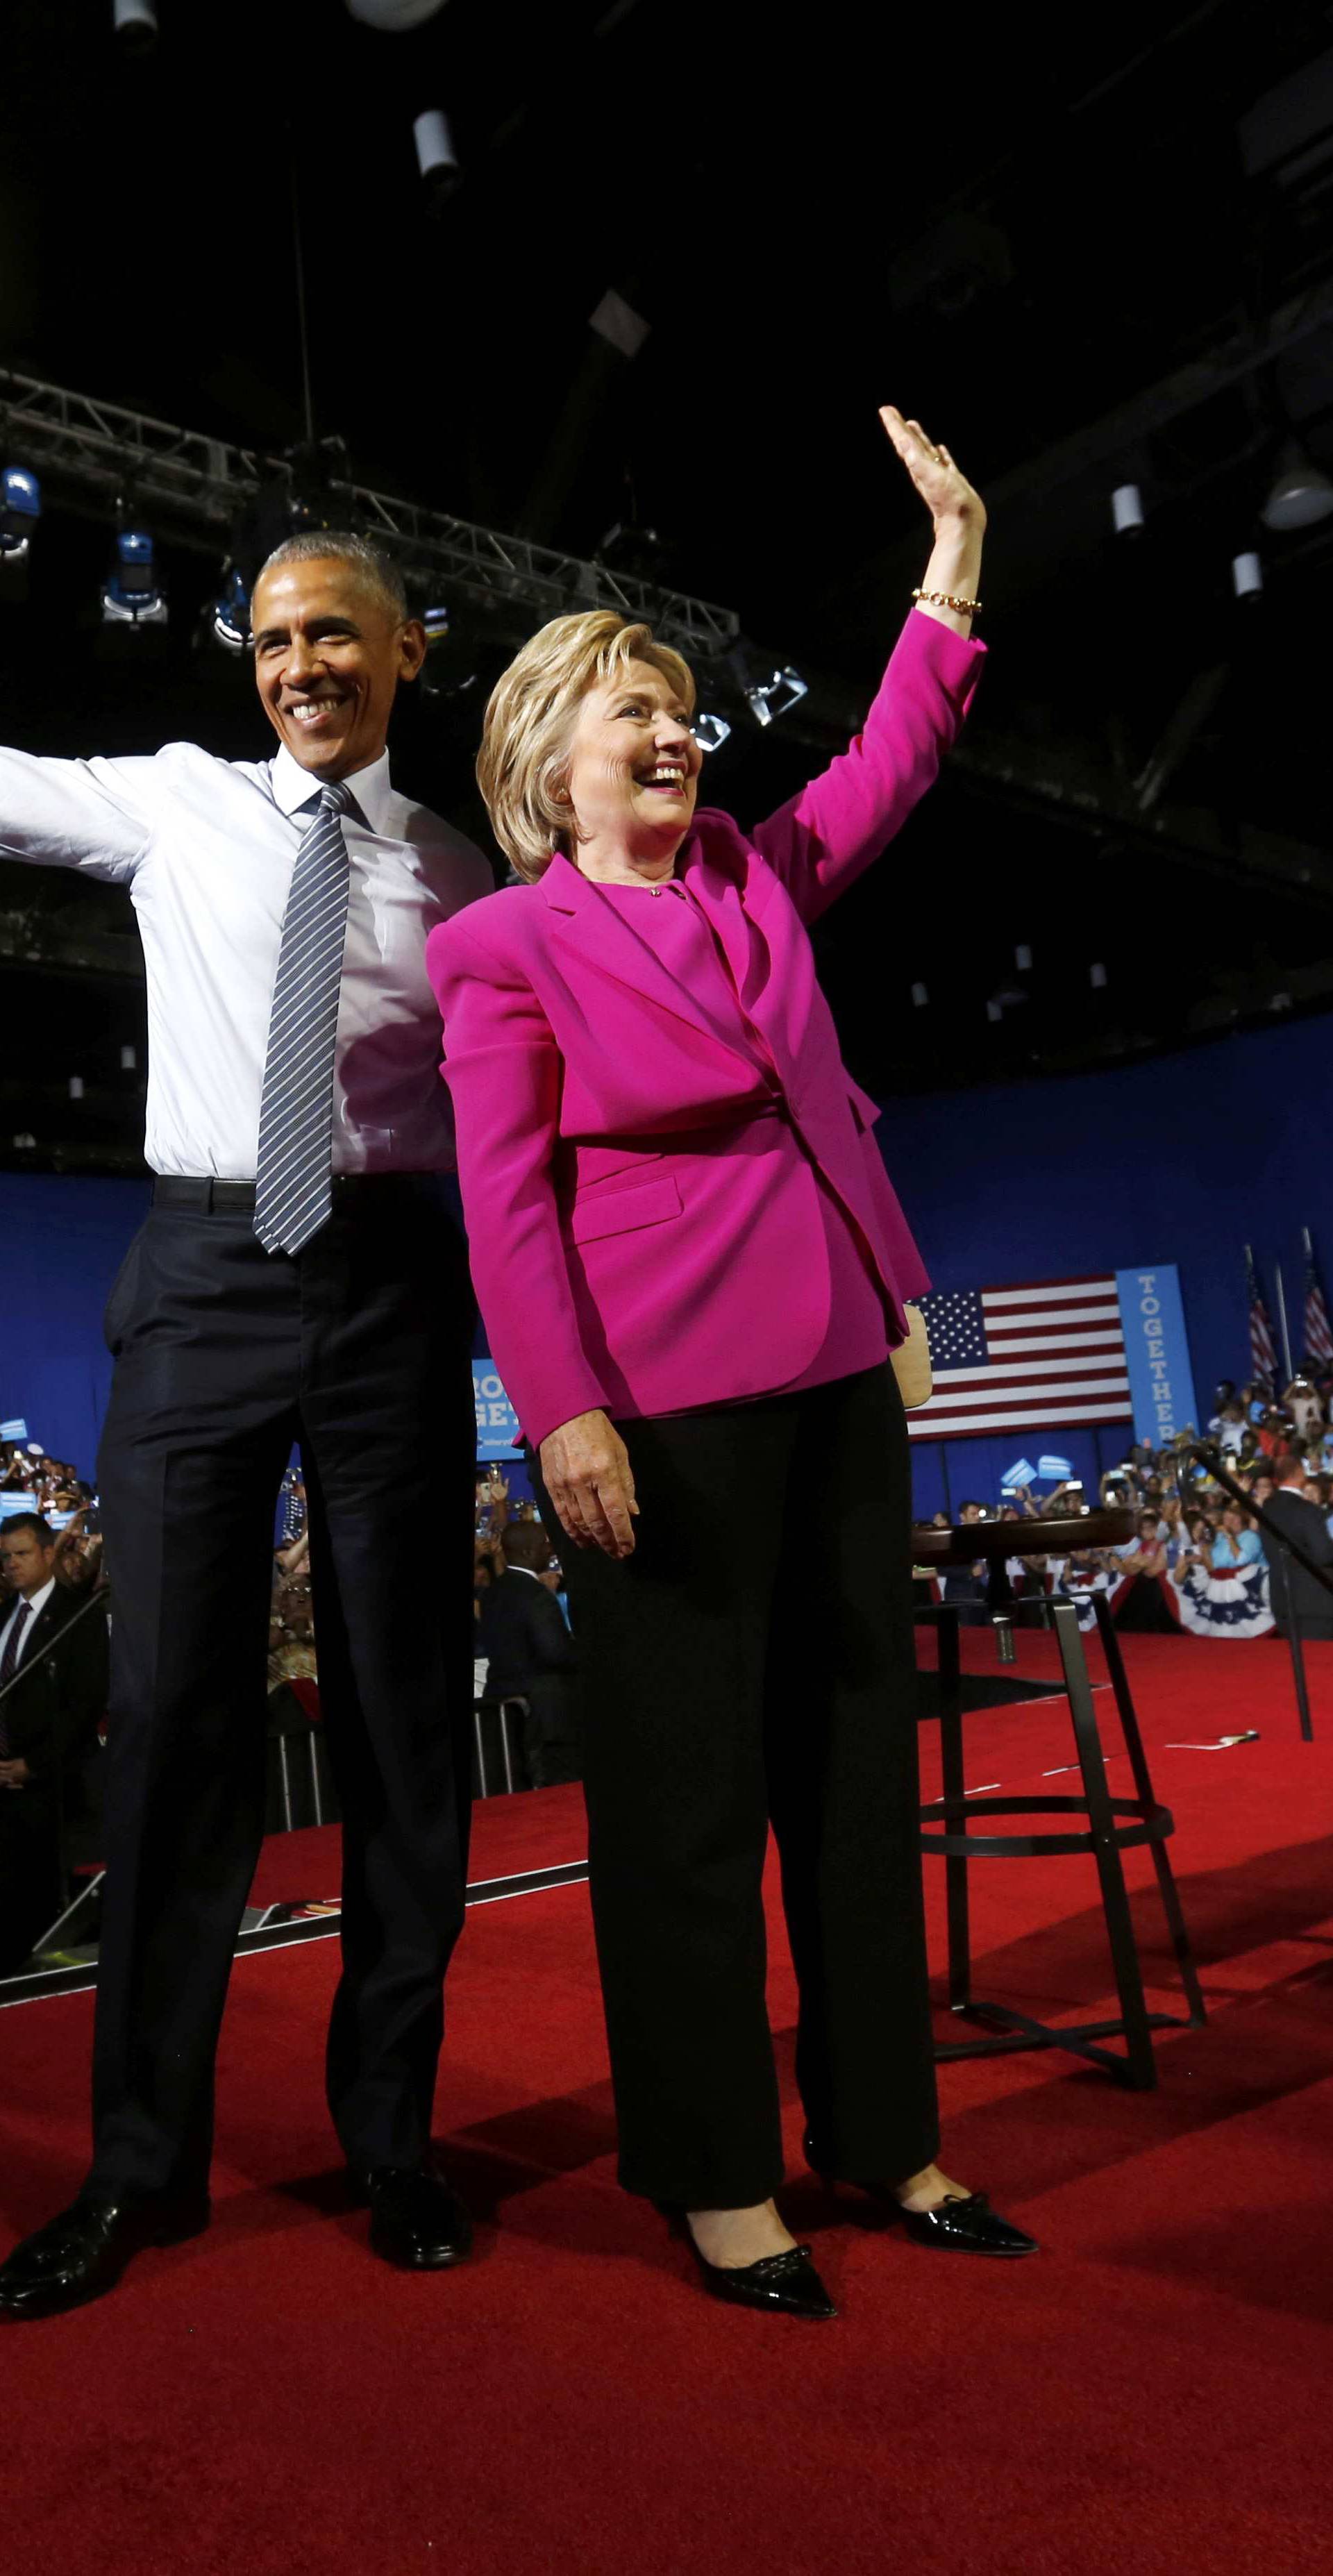 U.S. President Obama stands with Democratic U.S. presidential candidate Clinton at campaign event in Charlotte, North Carolina